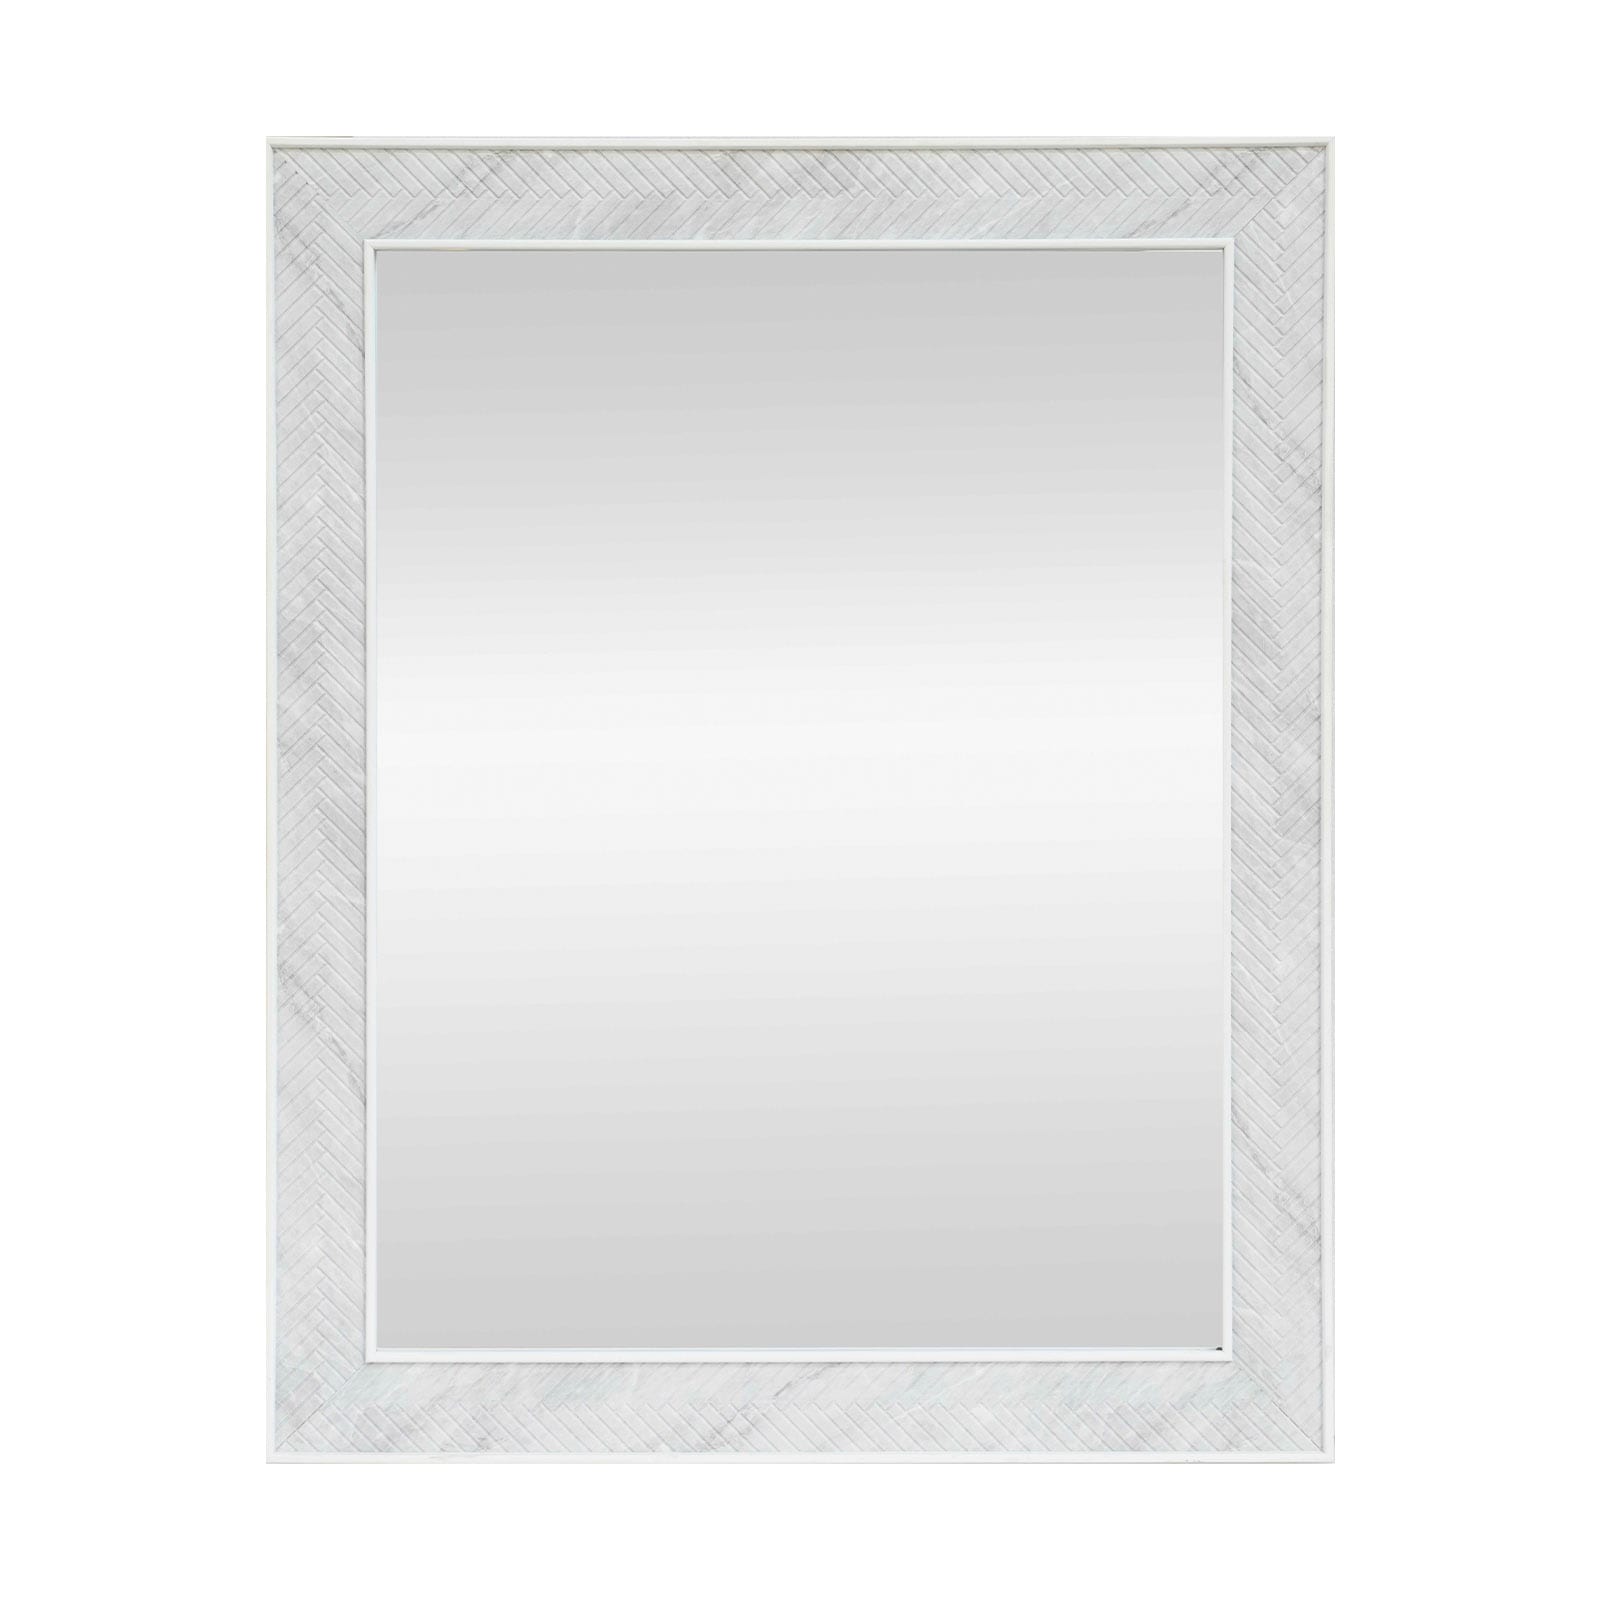 Allen + Roth Marble Framed Wall Mirror | 6817-WHT-3628 - White - 28 in